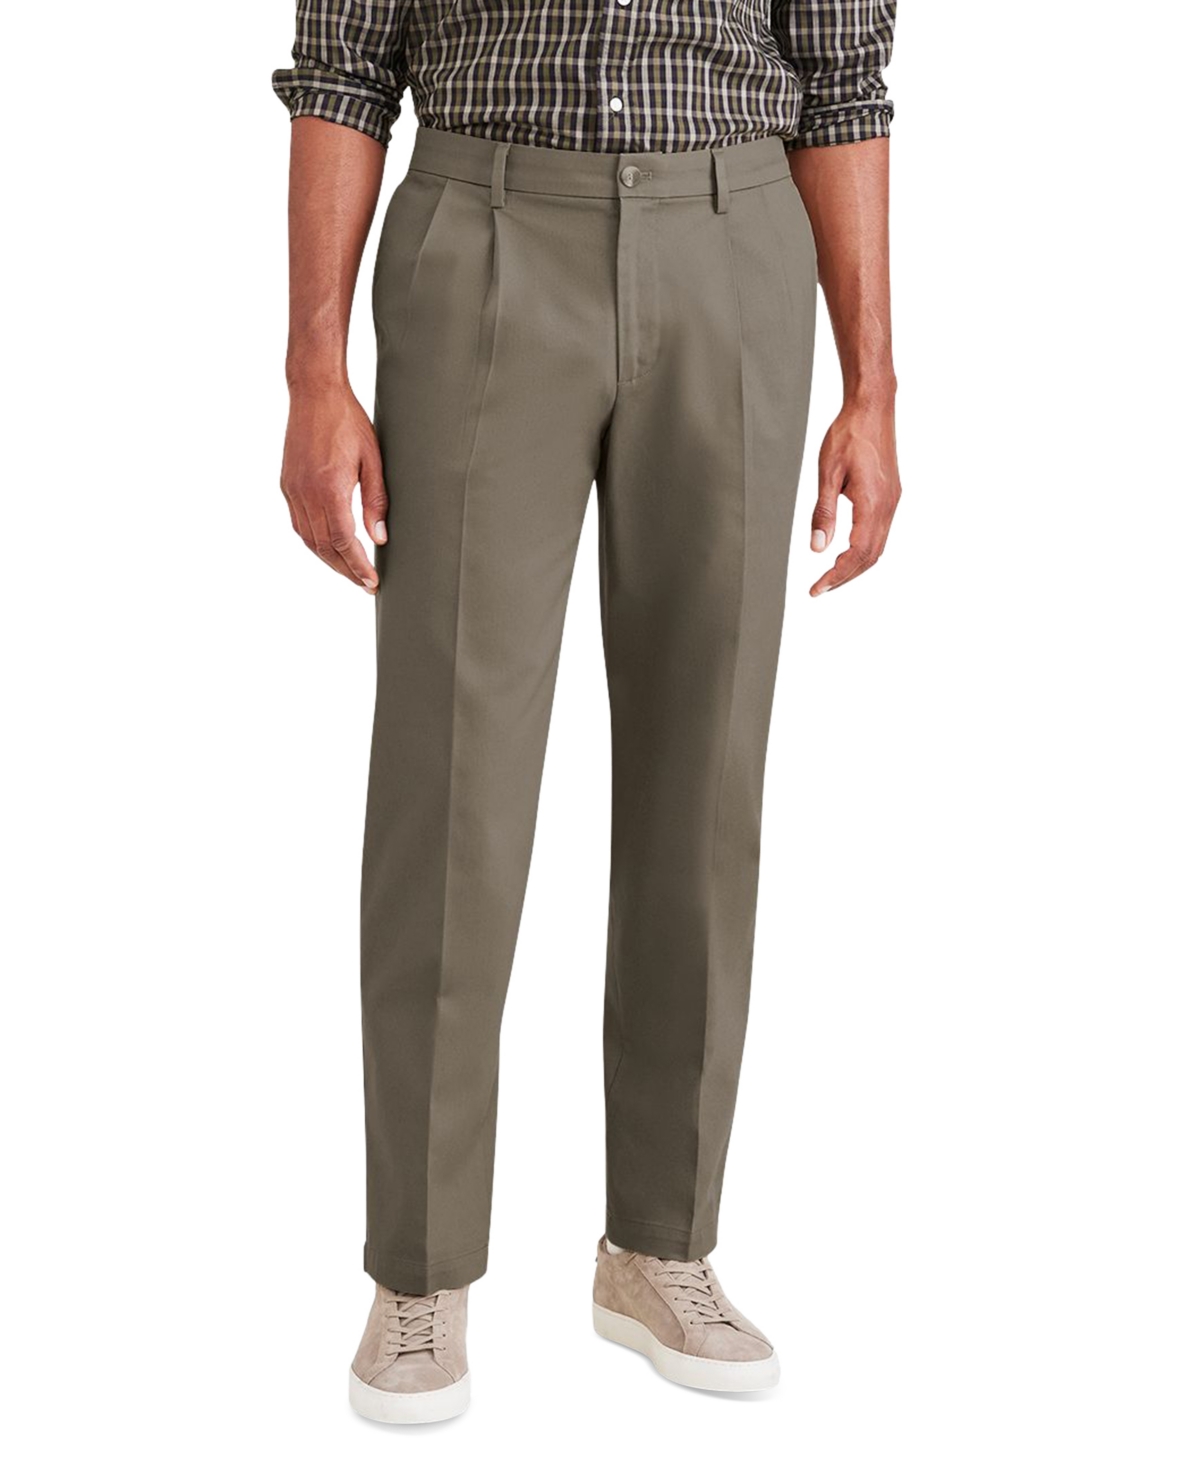 Men's Big & Tall Signature Classic Fit Pleated Iron Free Pants with Stain Defender - New British Khaki